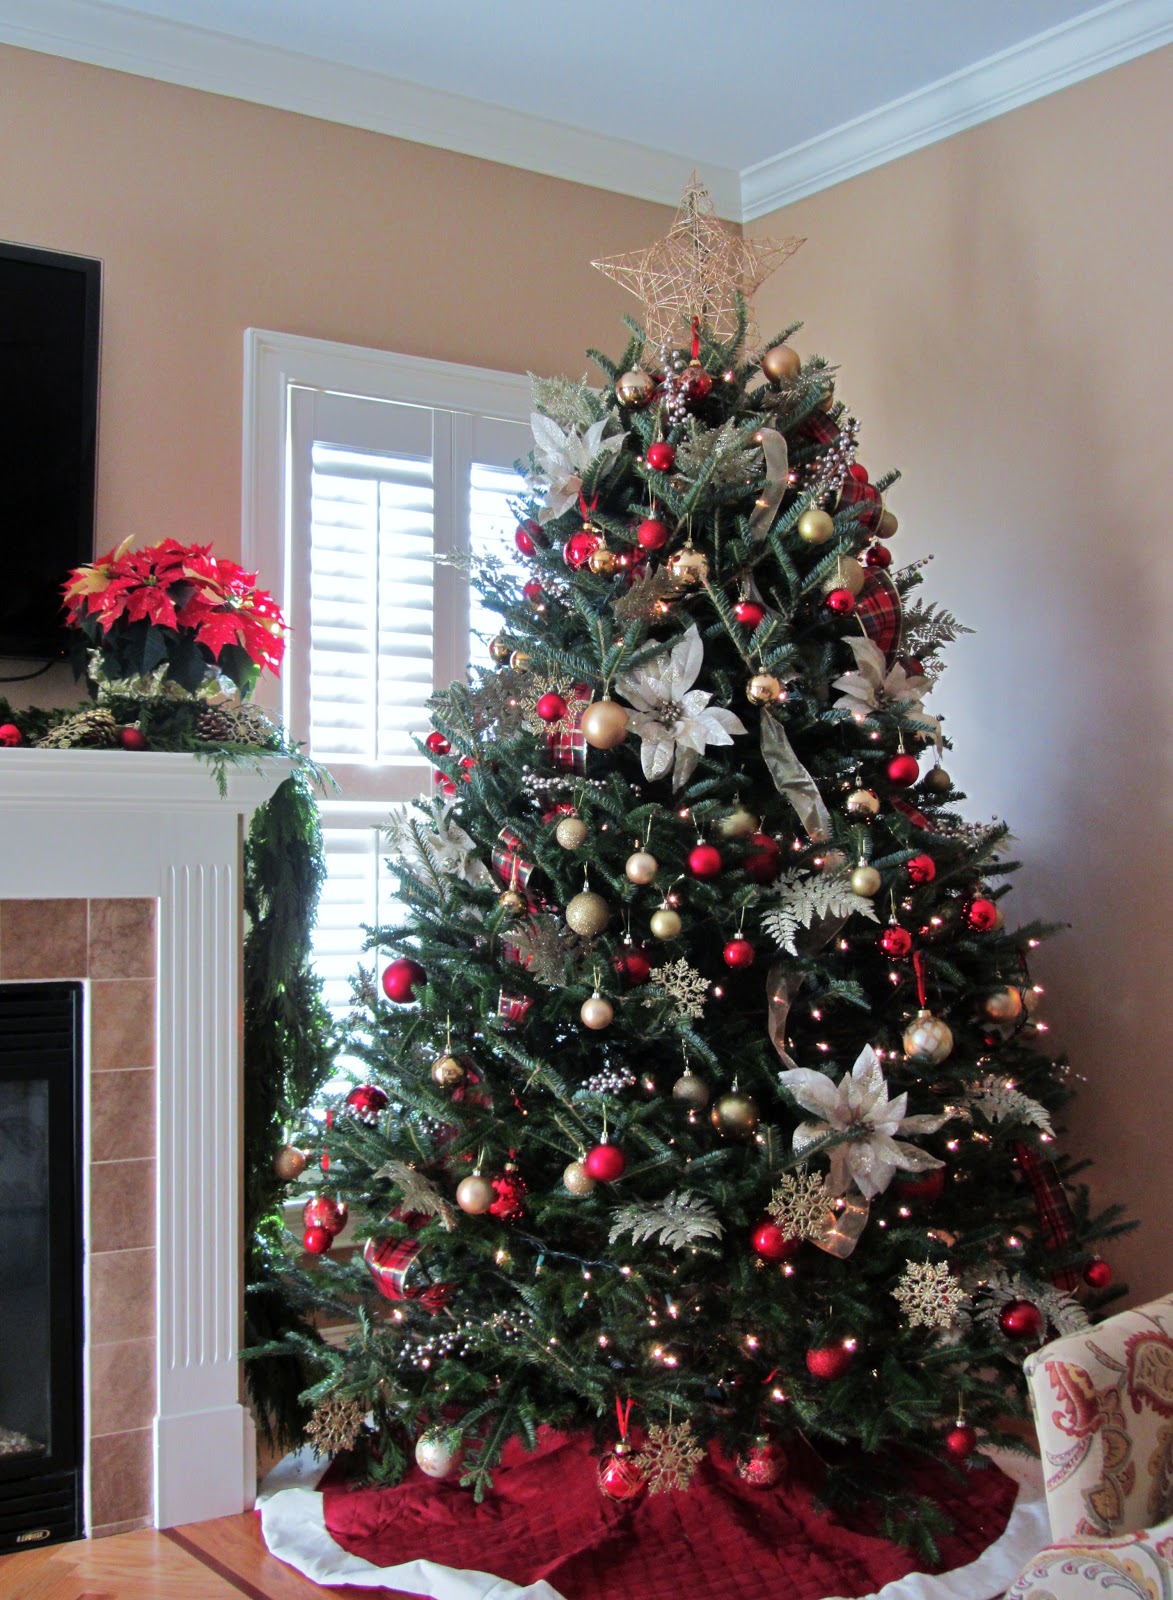 Christmas Tree Decorations Ideas and Tips To Decorate It ...